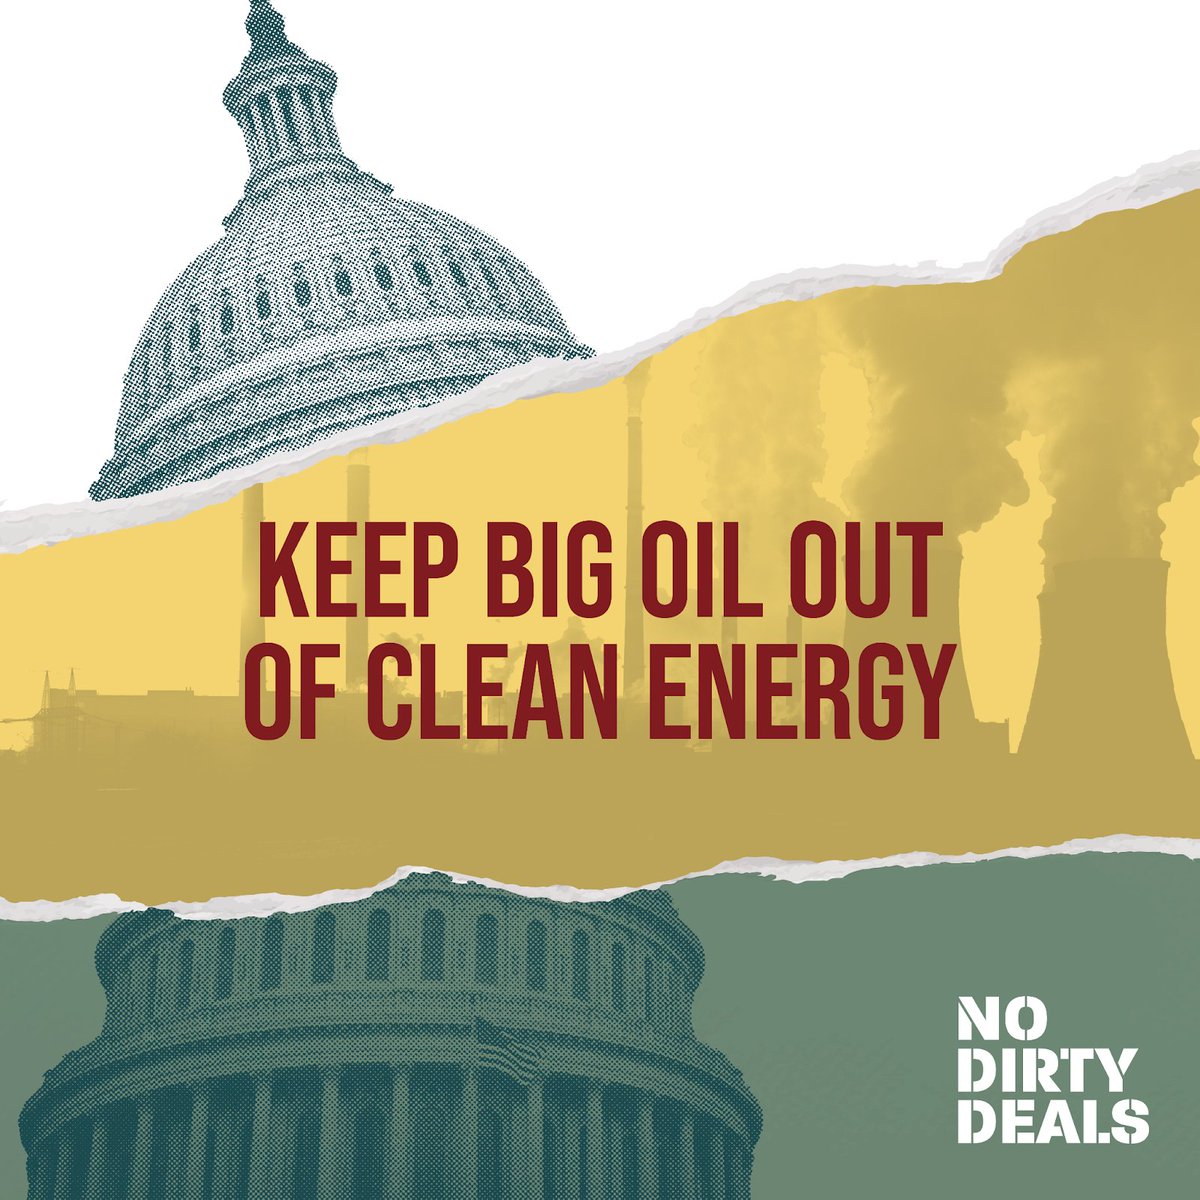 It’s simple: Manchin’s #DirtyDeal & the #DefaultOnAmerica Act would let oil companies decide where & when they want to build infrastructure. @POTUS, @ShalandaYoung46, & @SRicchetti46 should not make compromises that sacrifice our communities. #PeopleOverPolluters